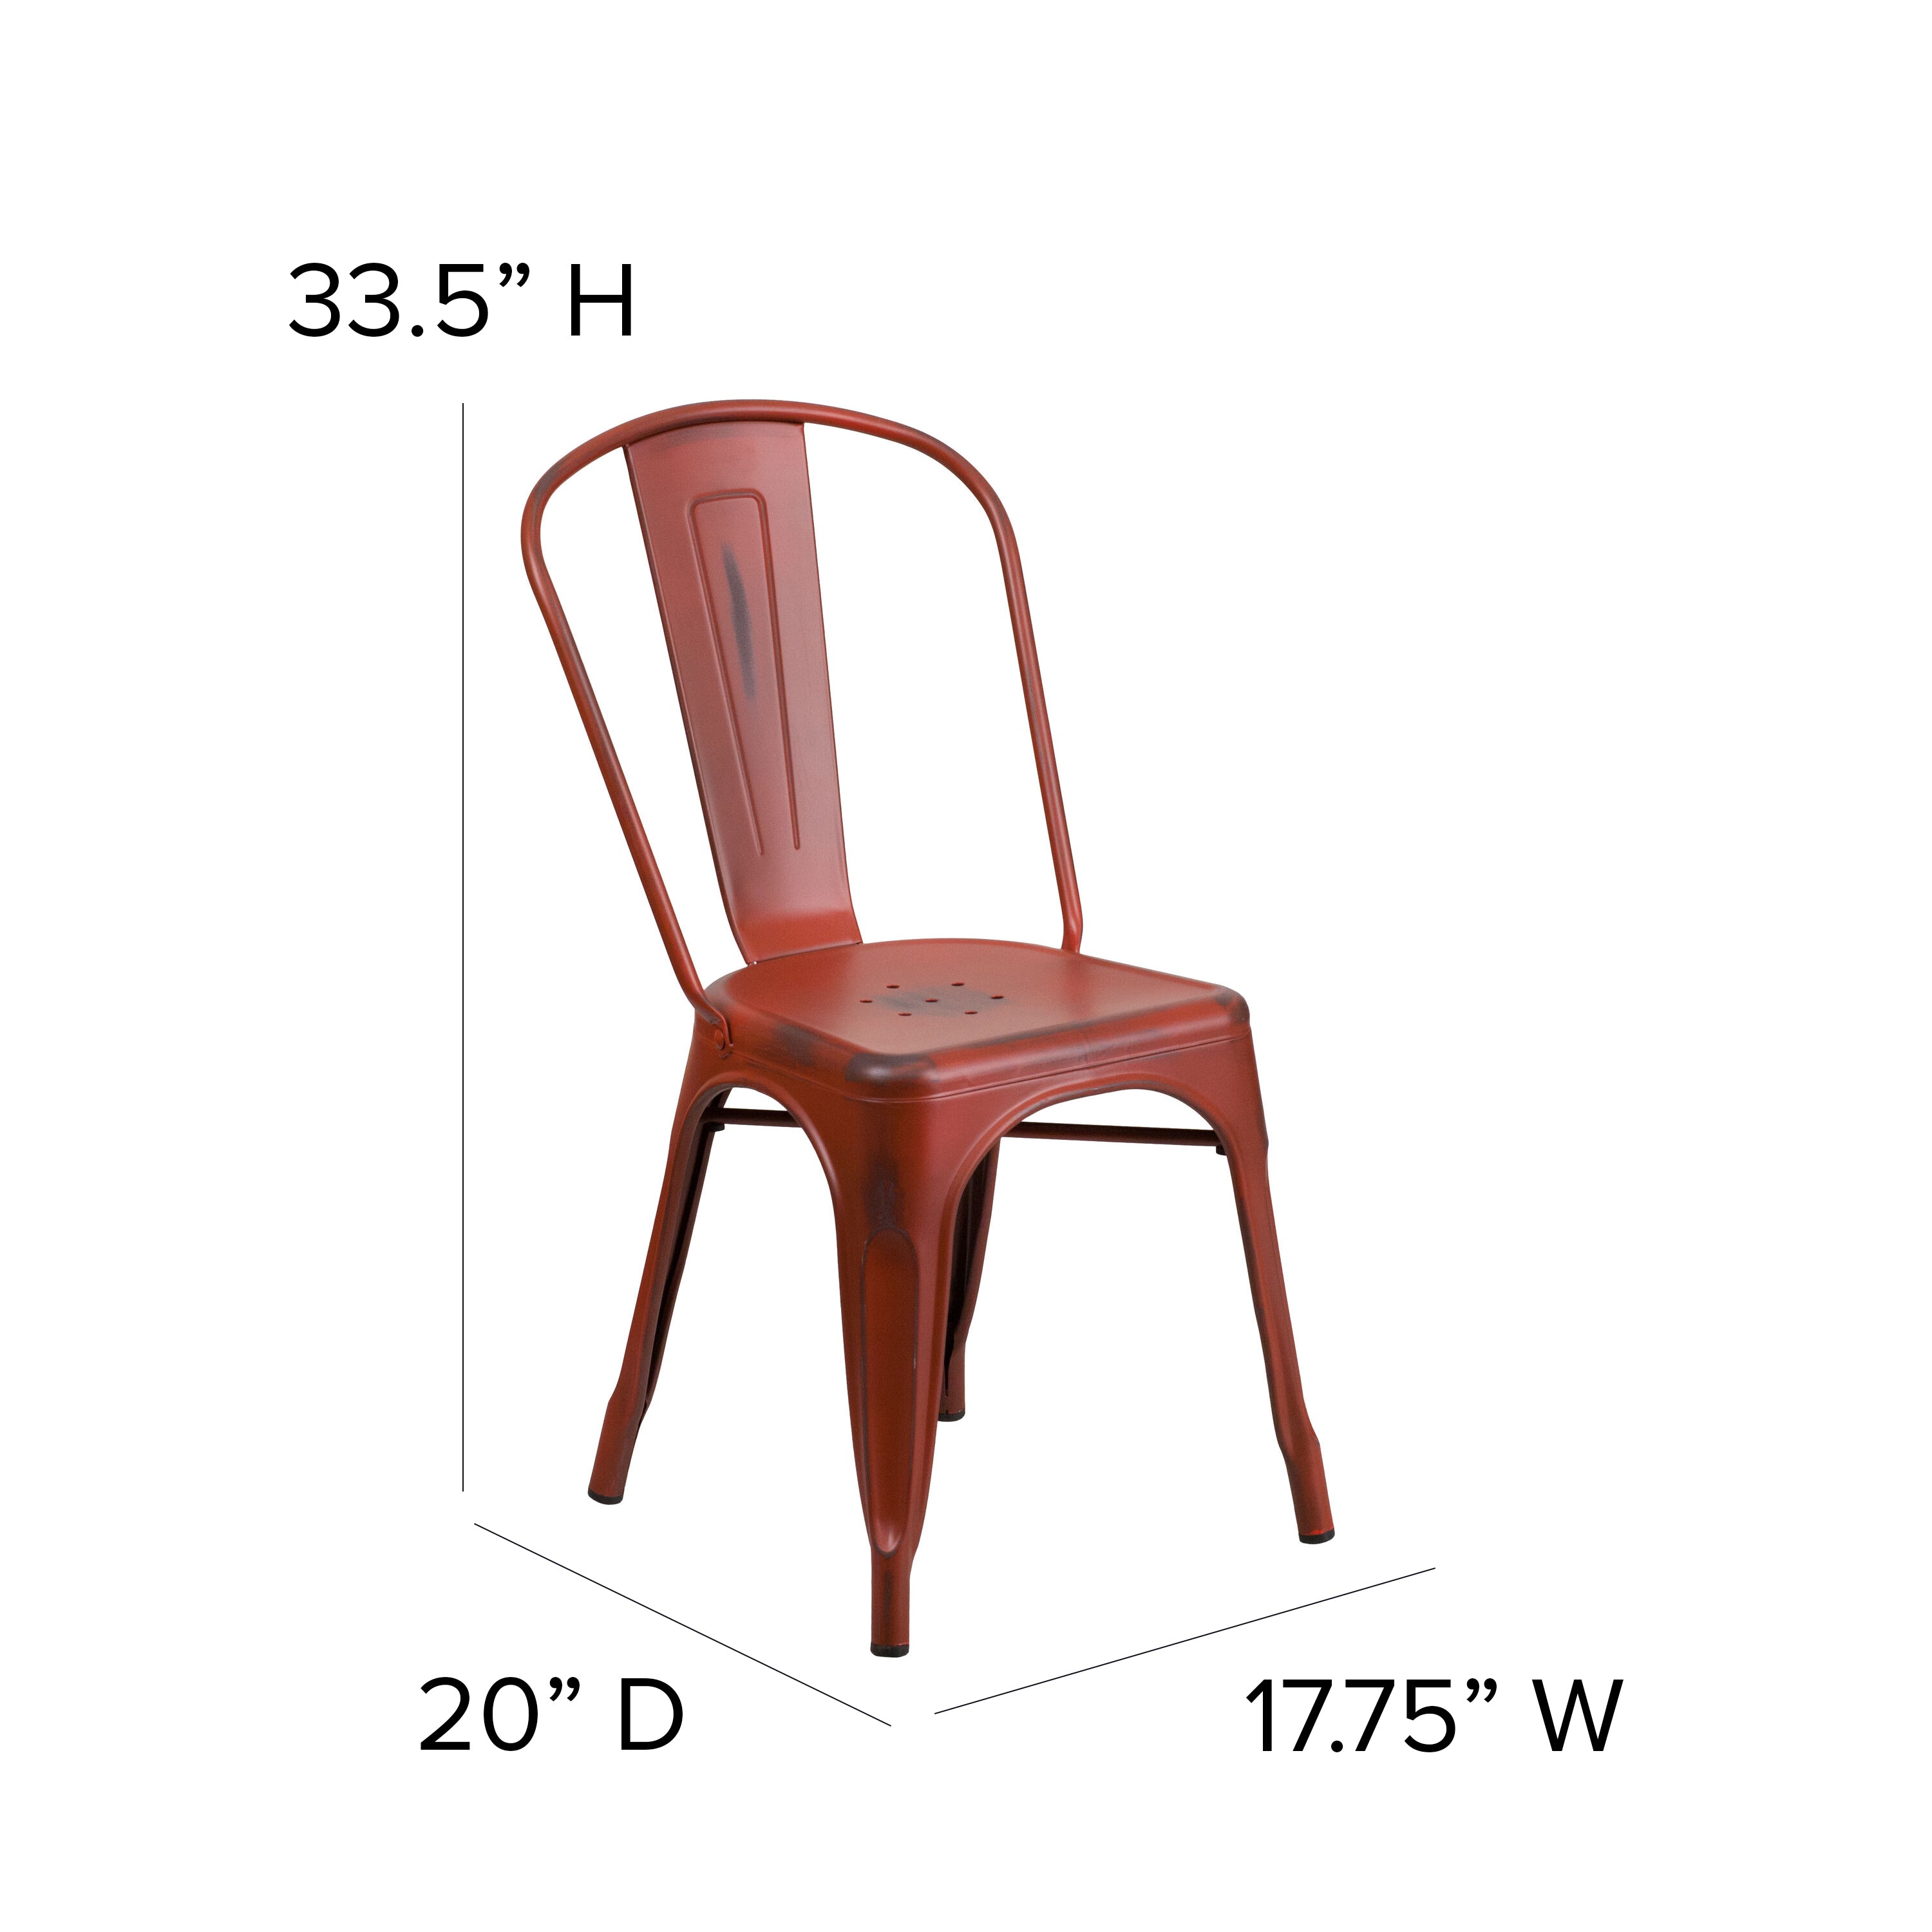 Commercial Grade Distressed Metal Indoor-Outdoor Stackable Chair-Indoor/Outdoor Chairs-Flash Furniture-Wall2Wall Furnishings